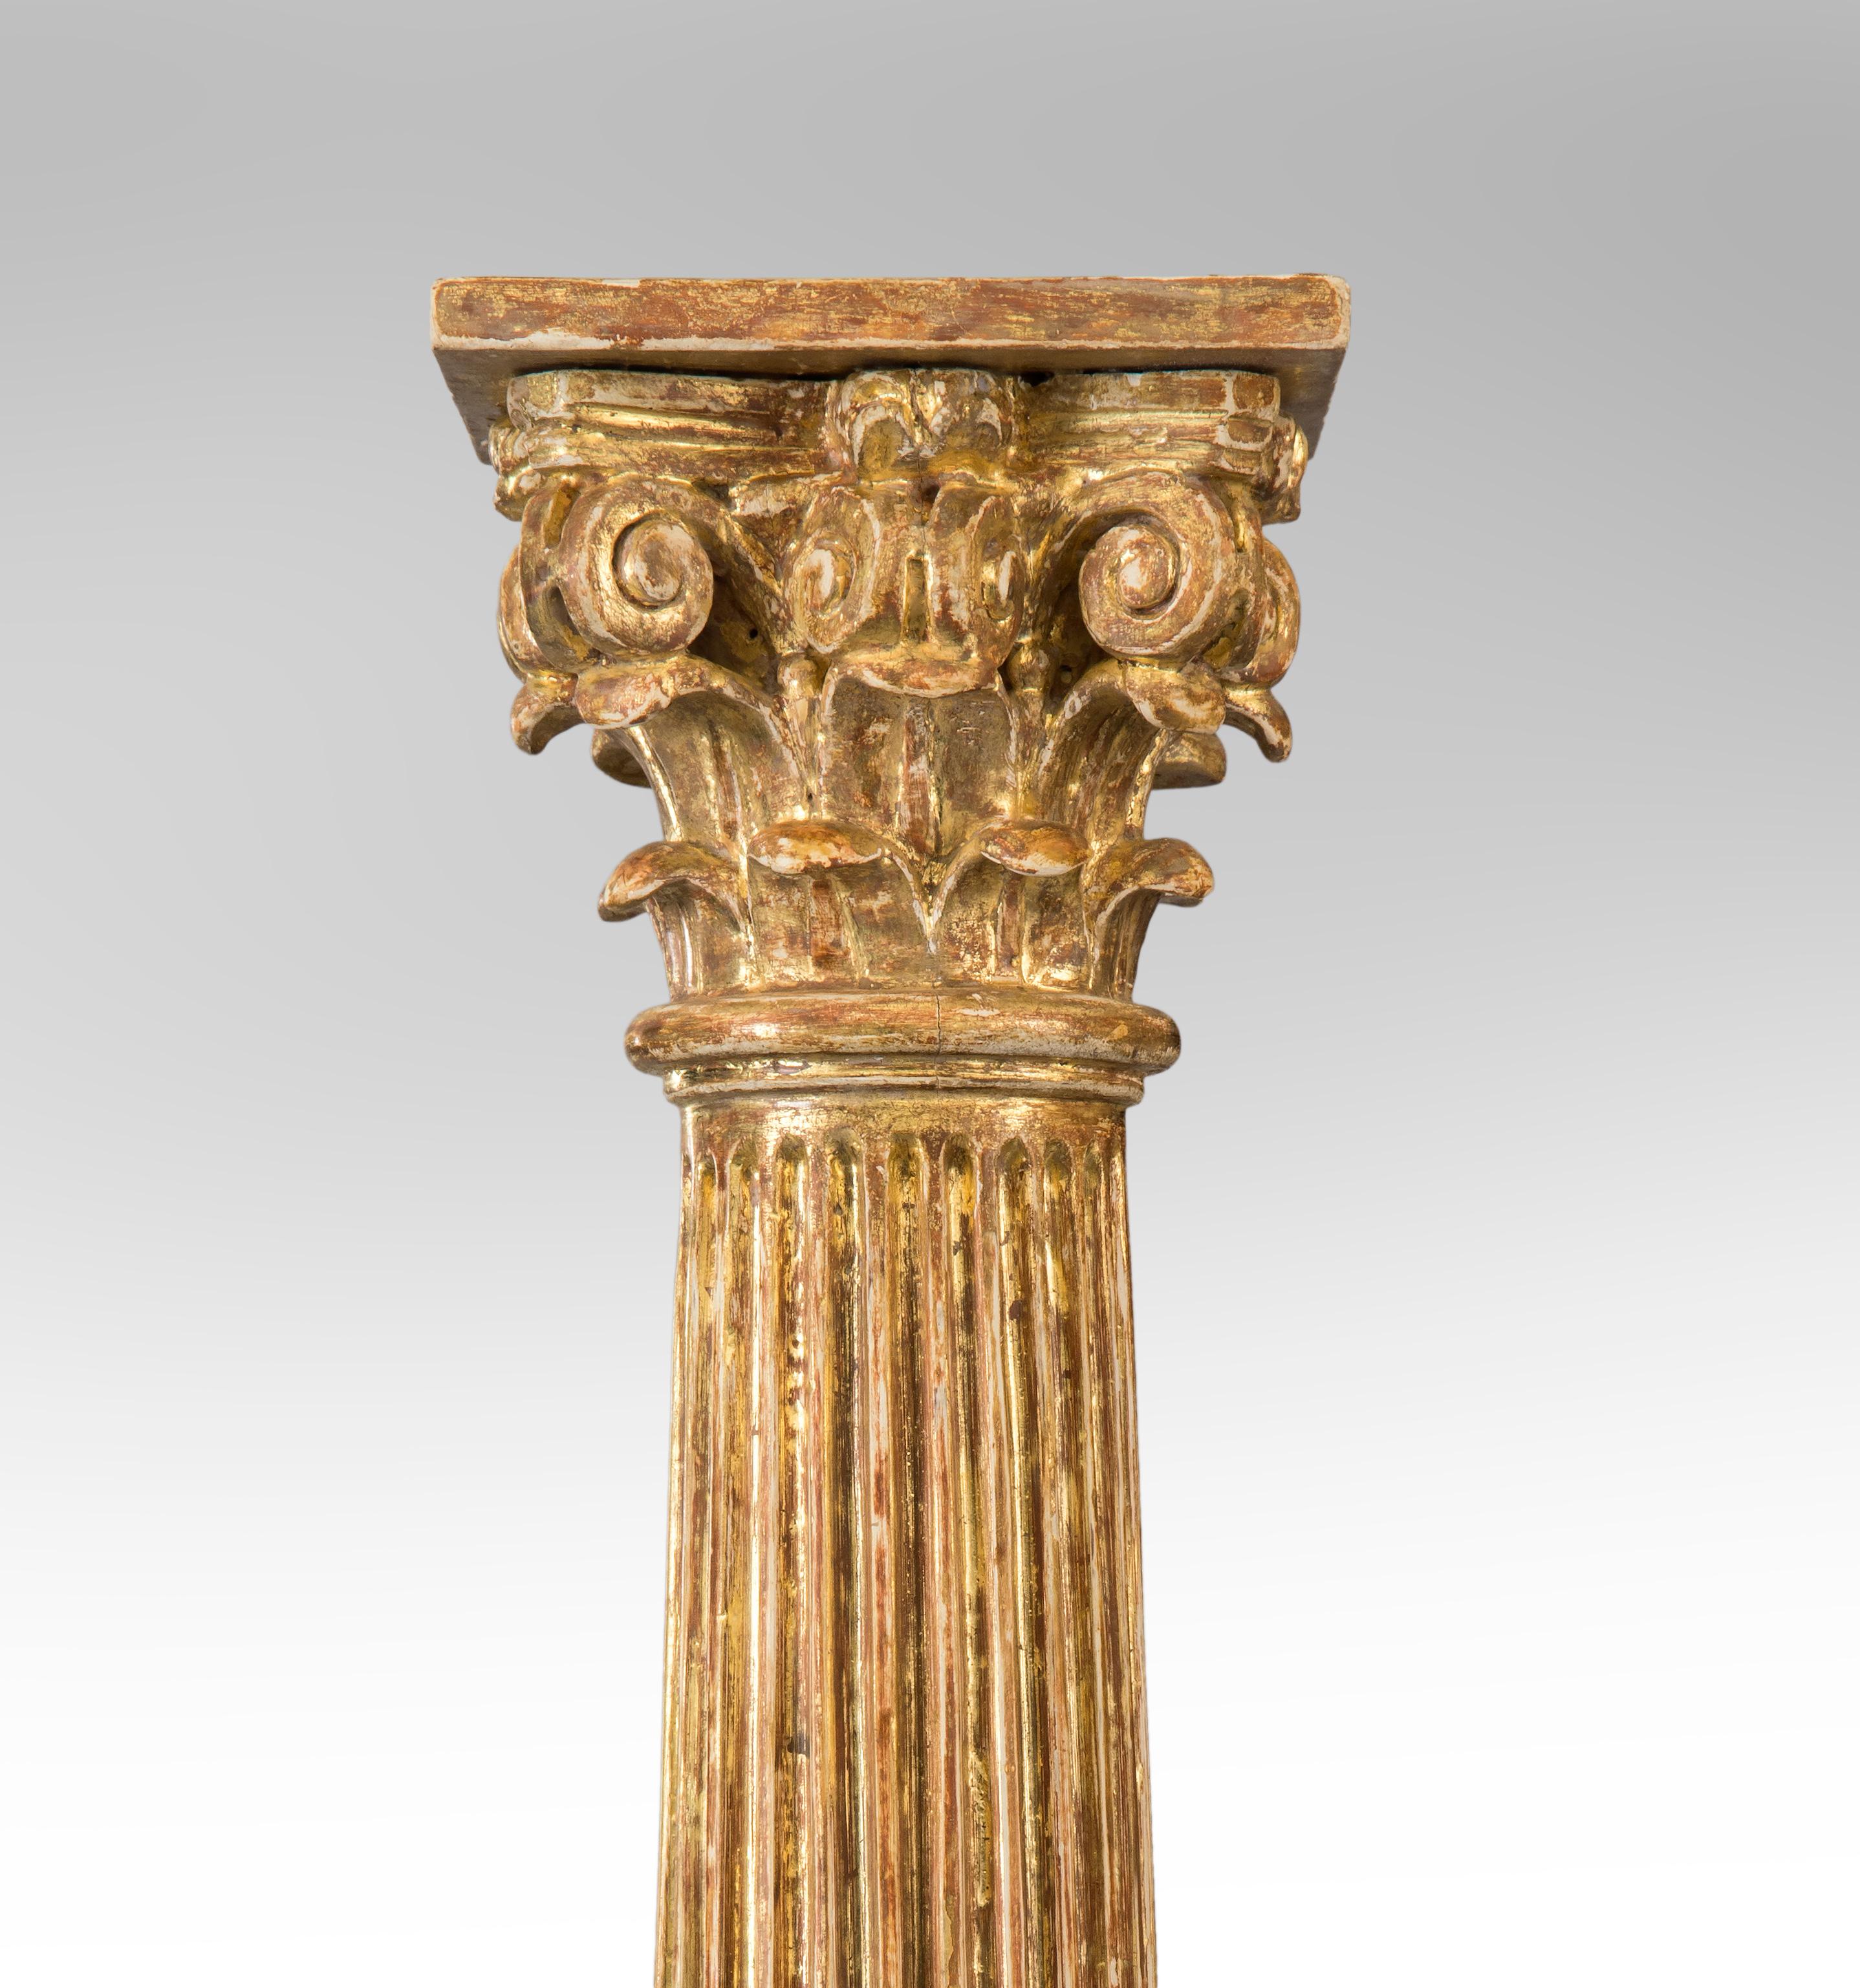 Pair of Italian giltwood Classical columns
18th or 19th century
These large giltwood columns standing on tall bases add gravitas and style to any room. The beautifully carved Corinthian capital above a fluted column on a stepped base adorned with